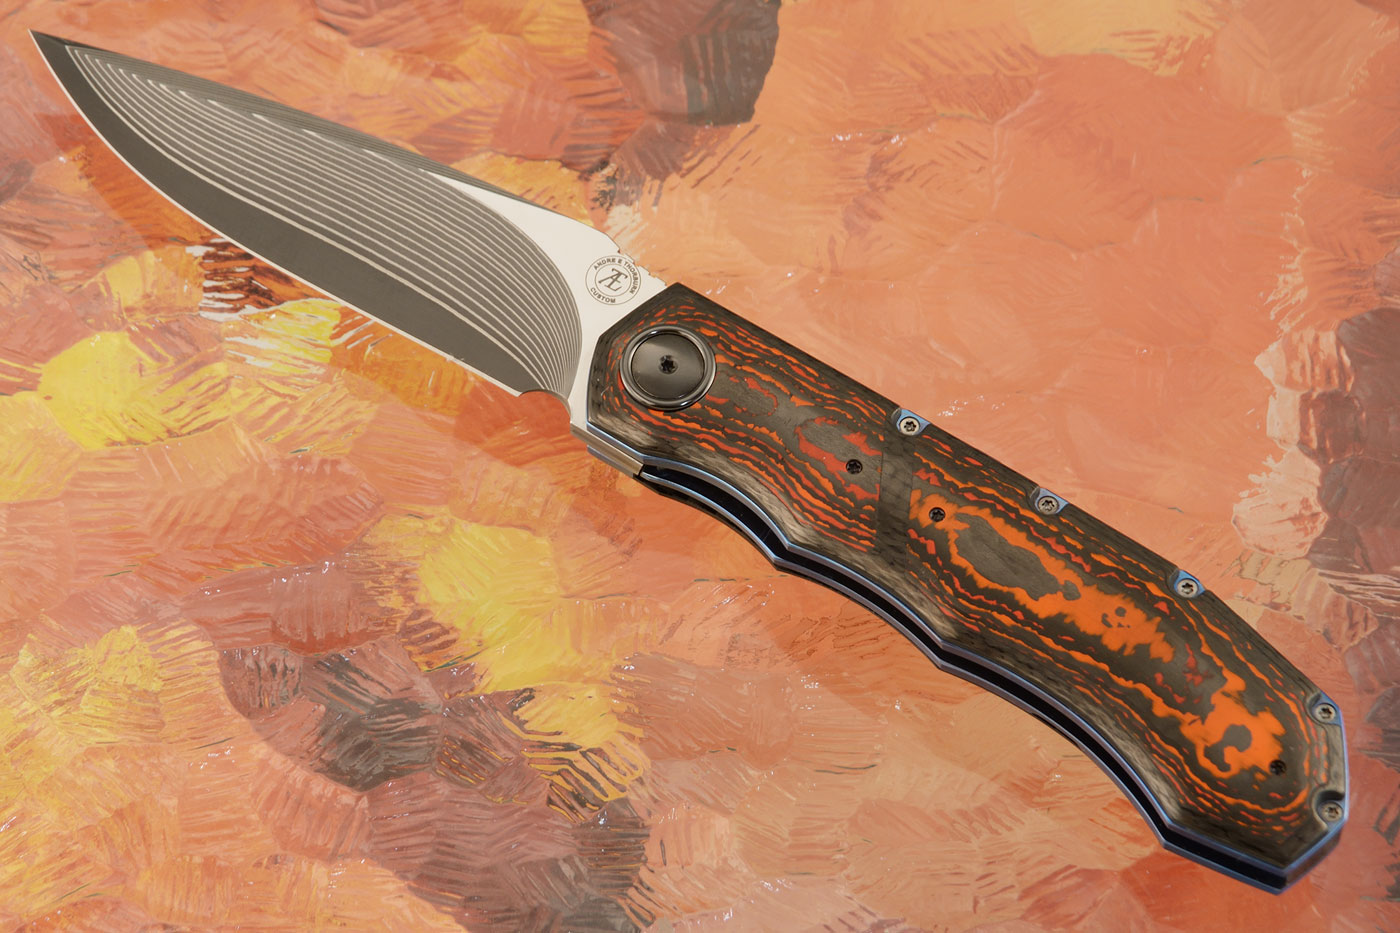 L51 Compact Front Flipper with Carbon Fiber and Mars Valley FatCarbon (Ceramic IKBS) - SG2 Damascus San Mai